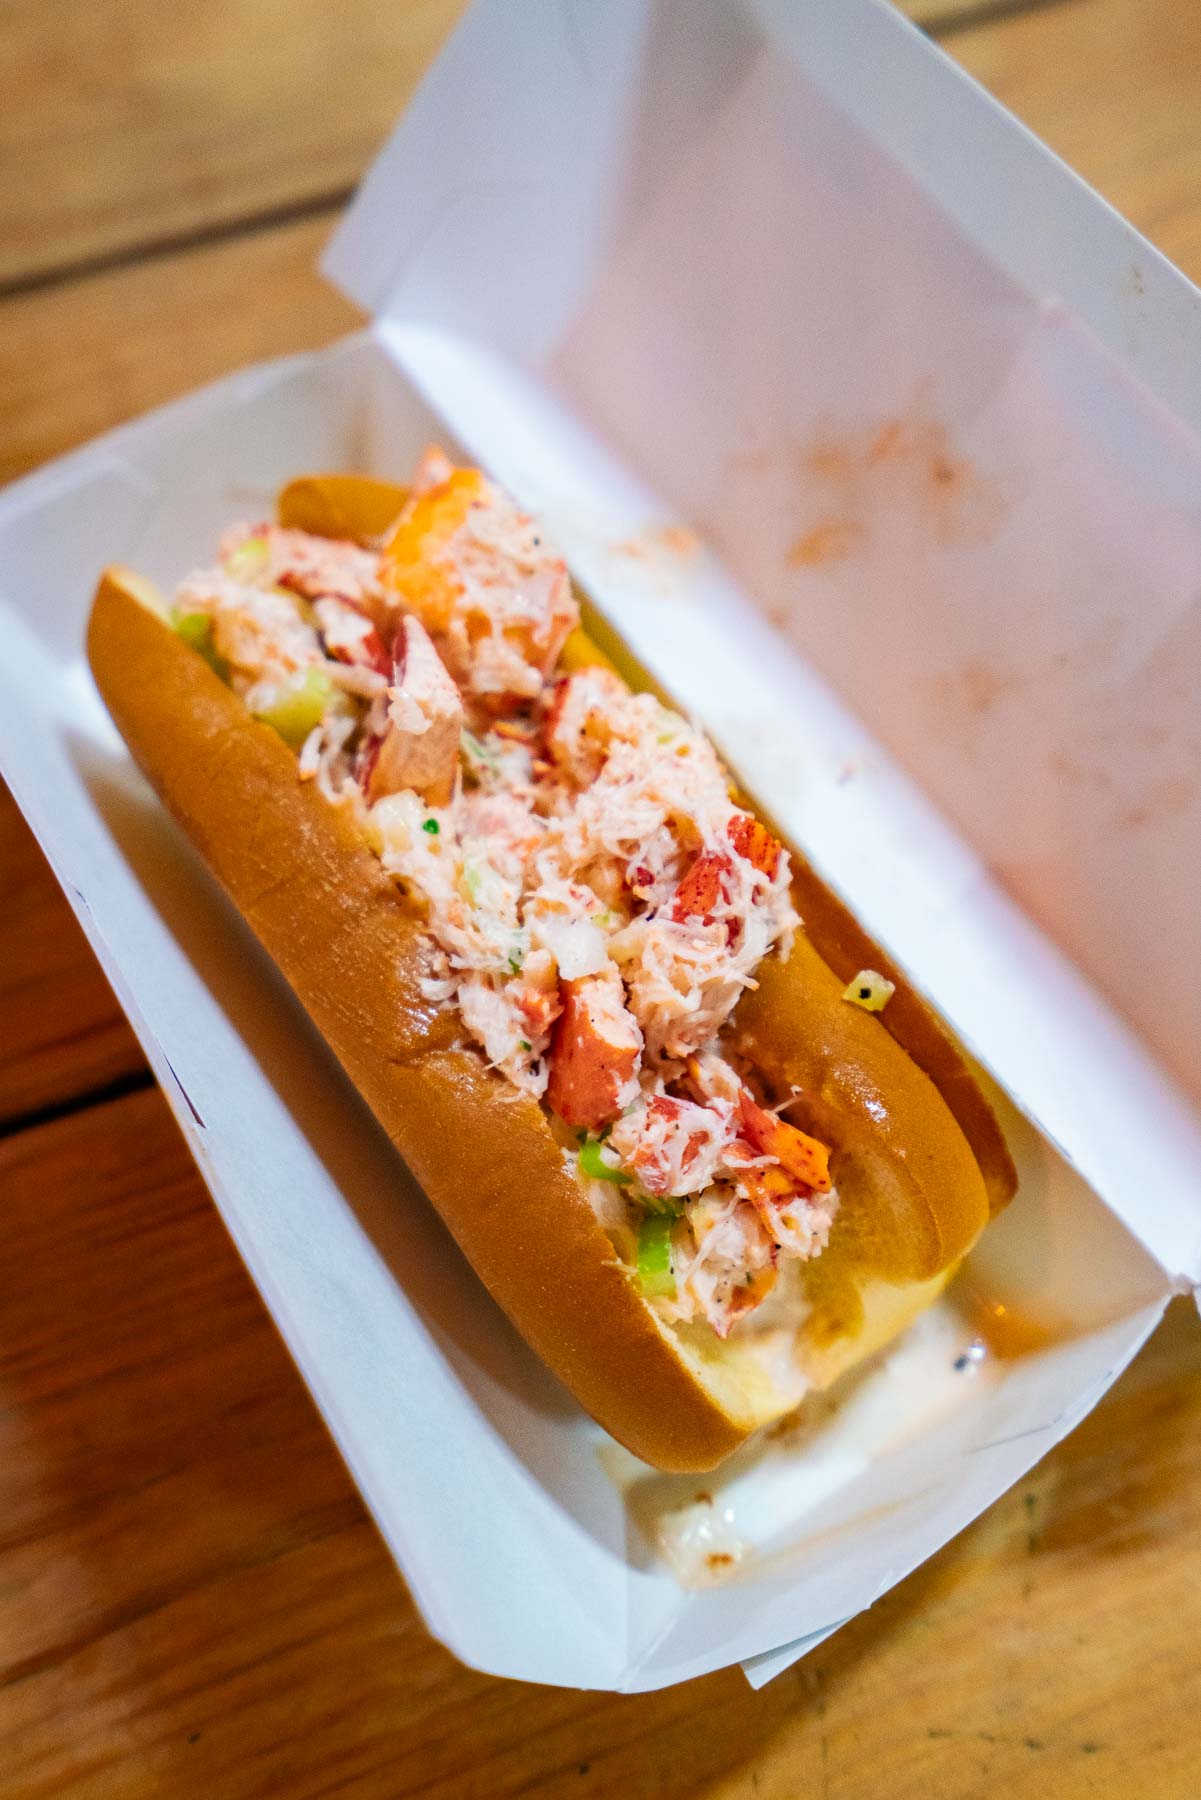 A Lobster roll from the Lobster Place, one of the best restaurants at the Chelsea Market